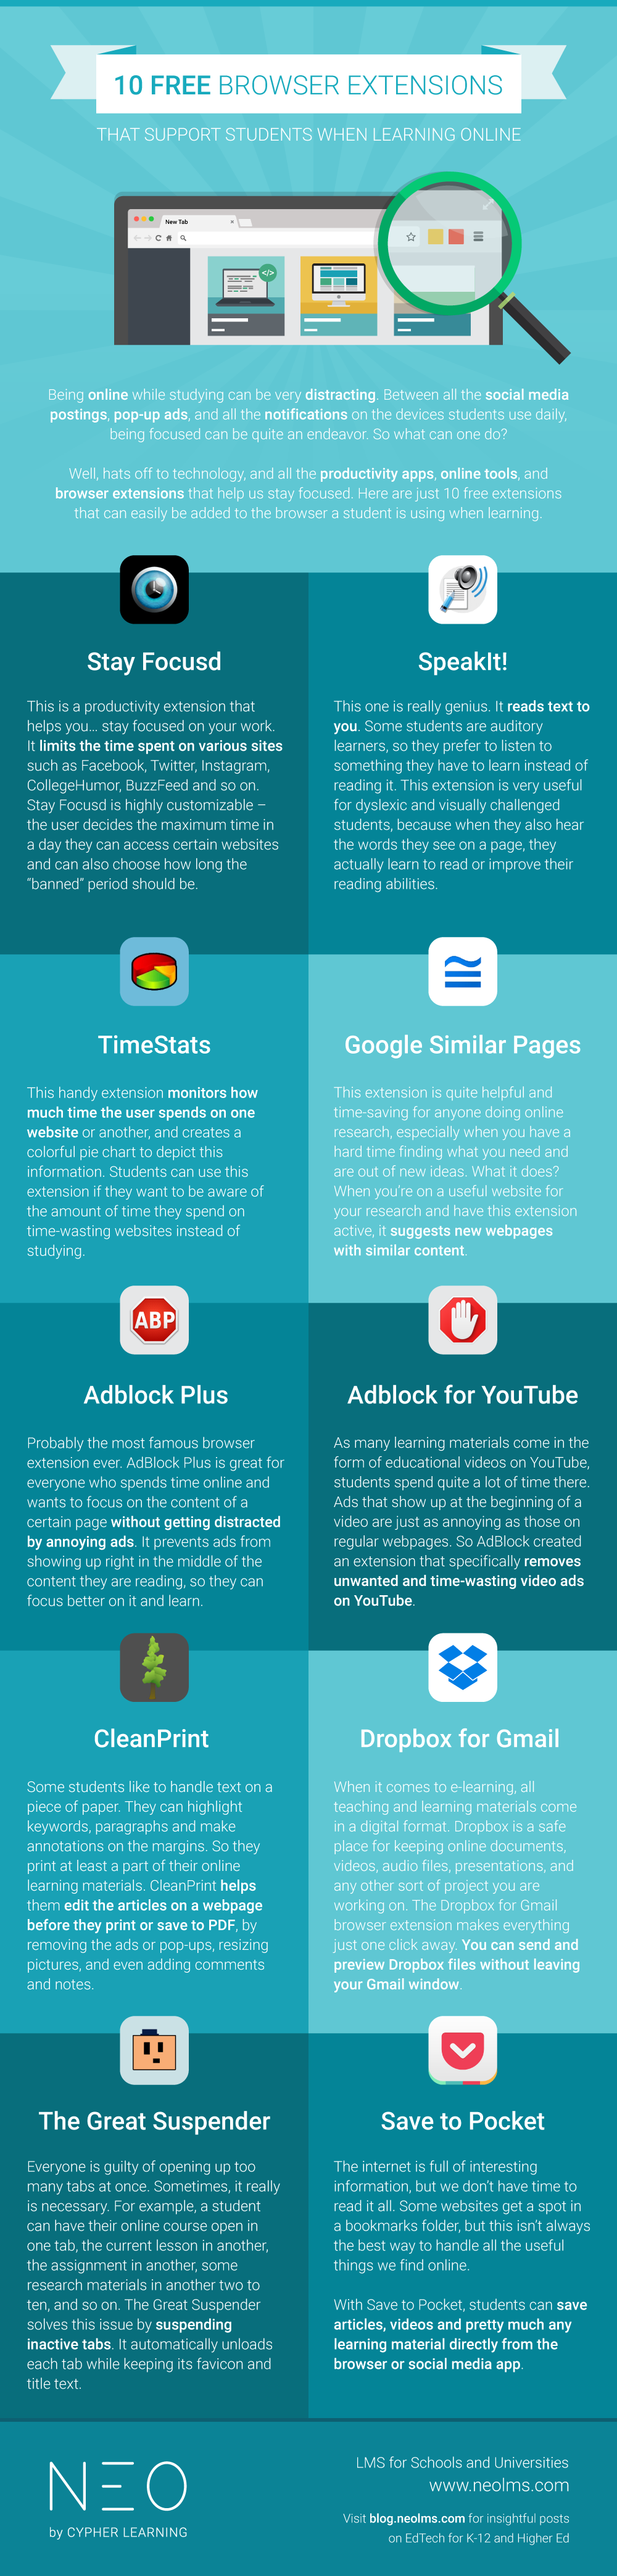 Free browser extensions for students INFOGRAPHIC